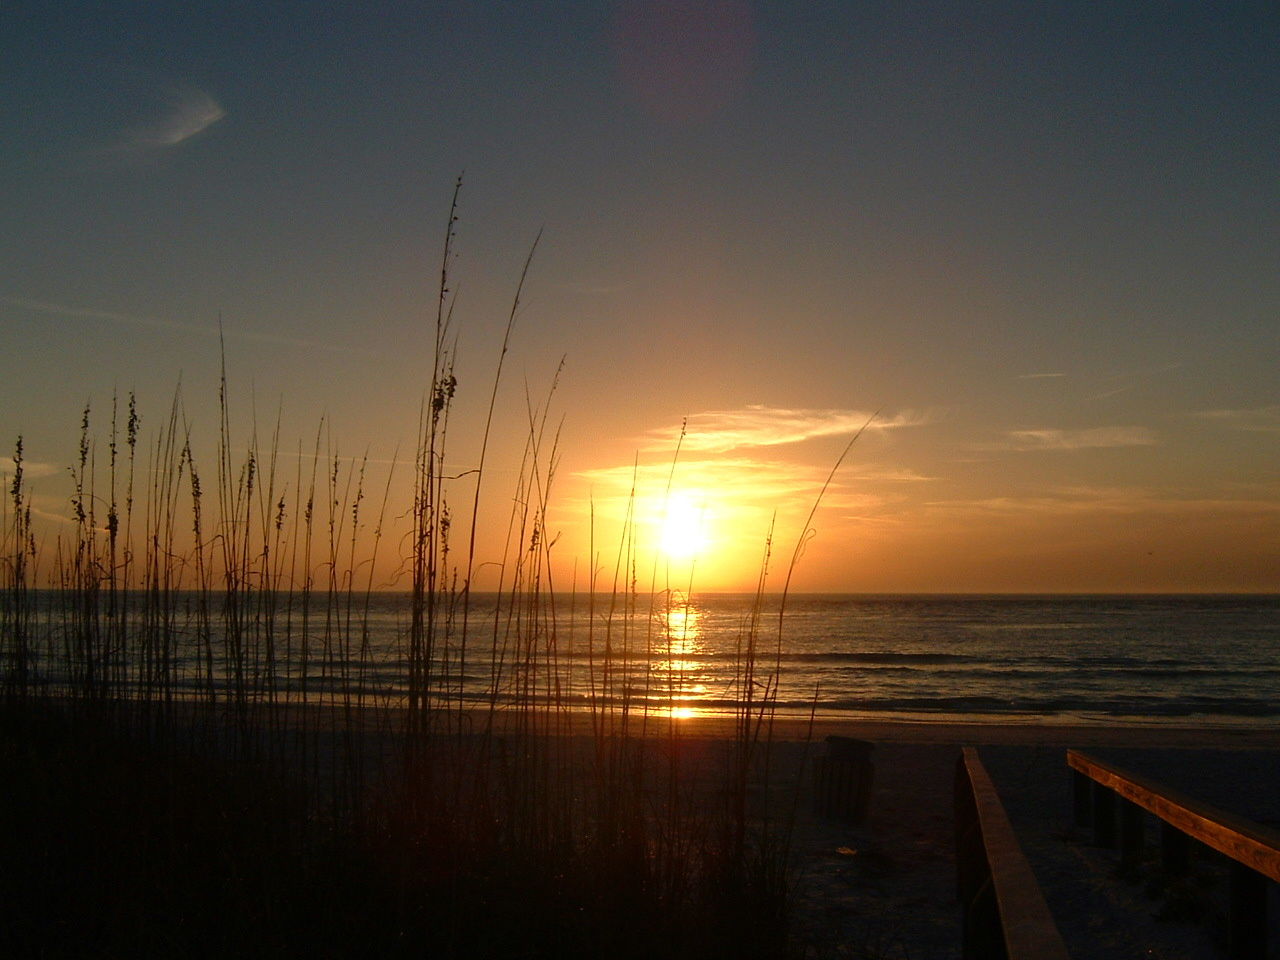 Sunset at Pass-a-Grille on St. Pete Beach.